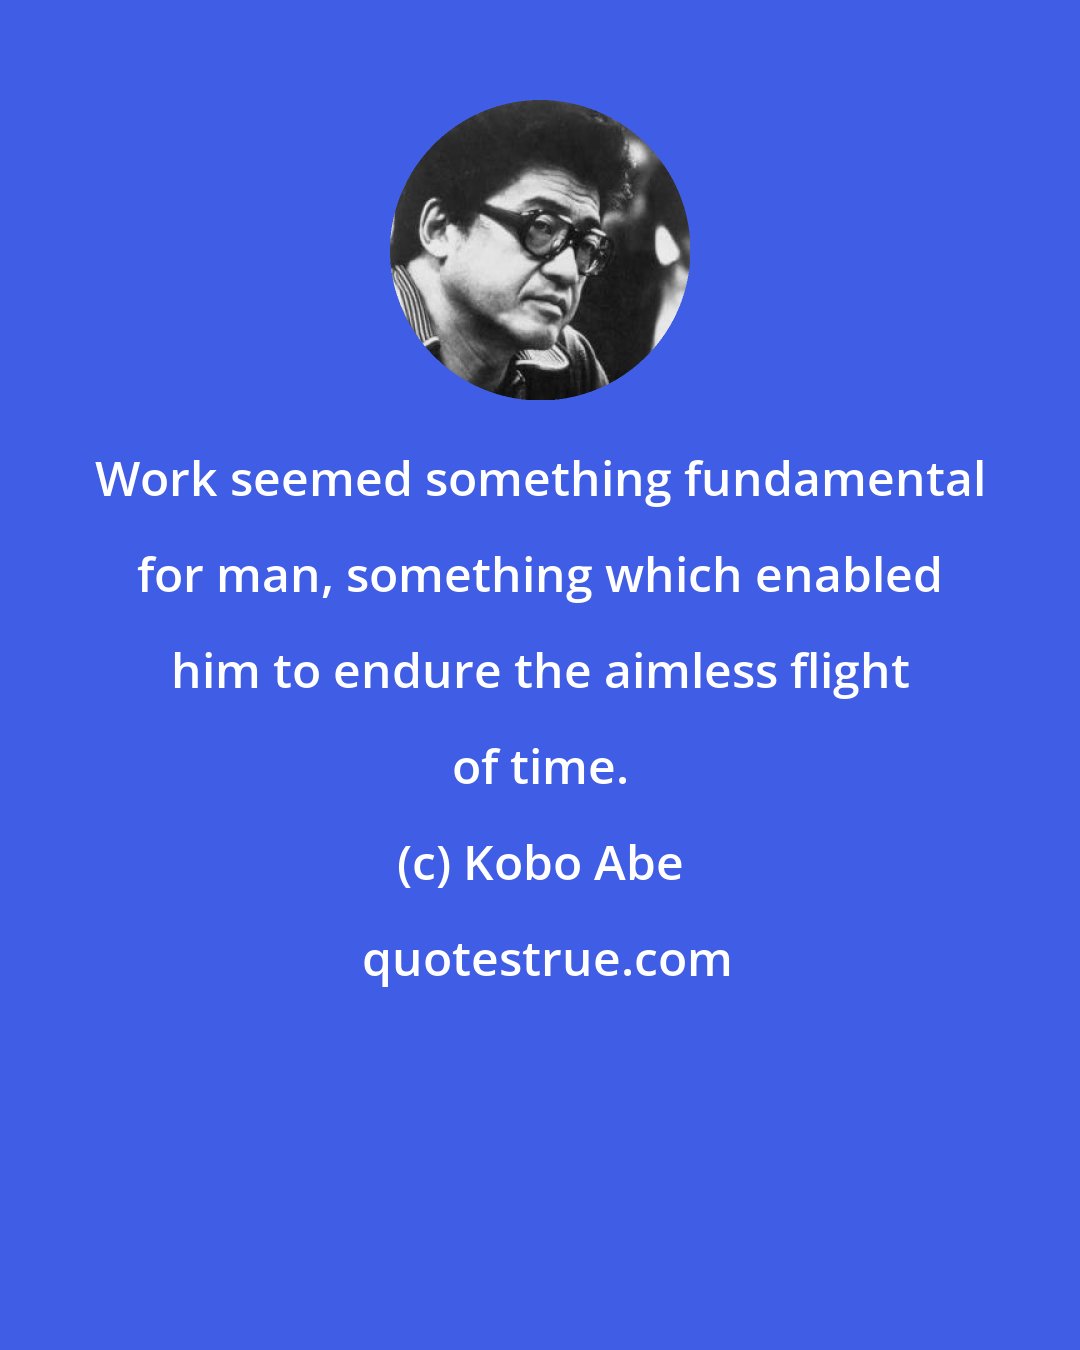 Kobo Abe: Work seemed something fundamental for man, something which enabled him to endure the aimless flight of time.